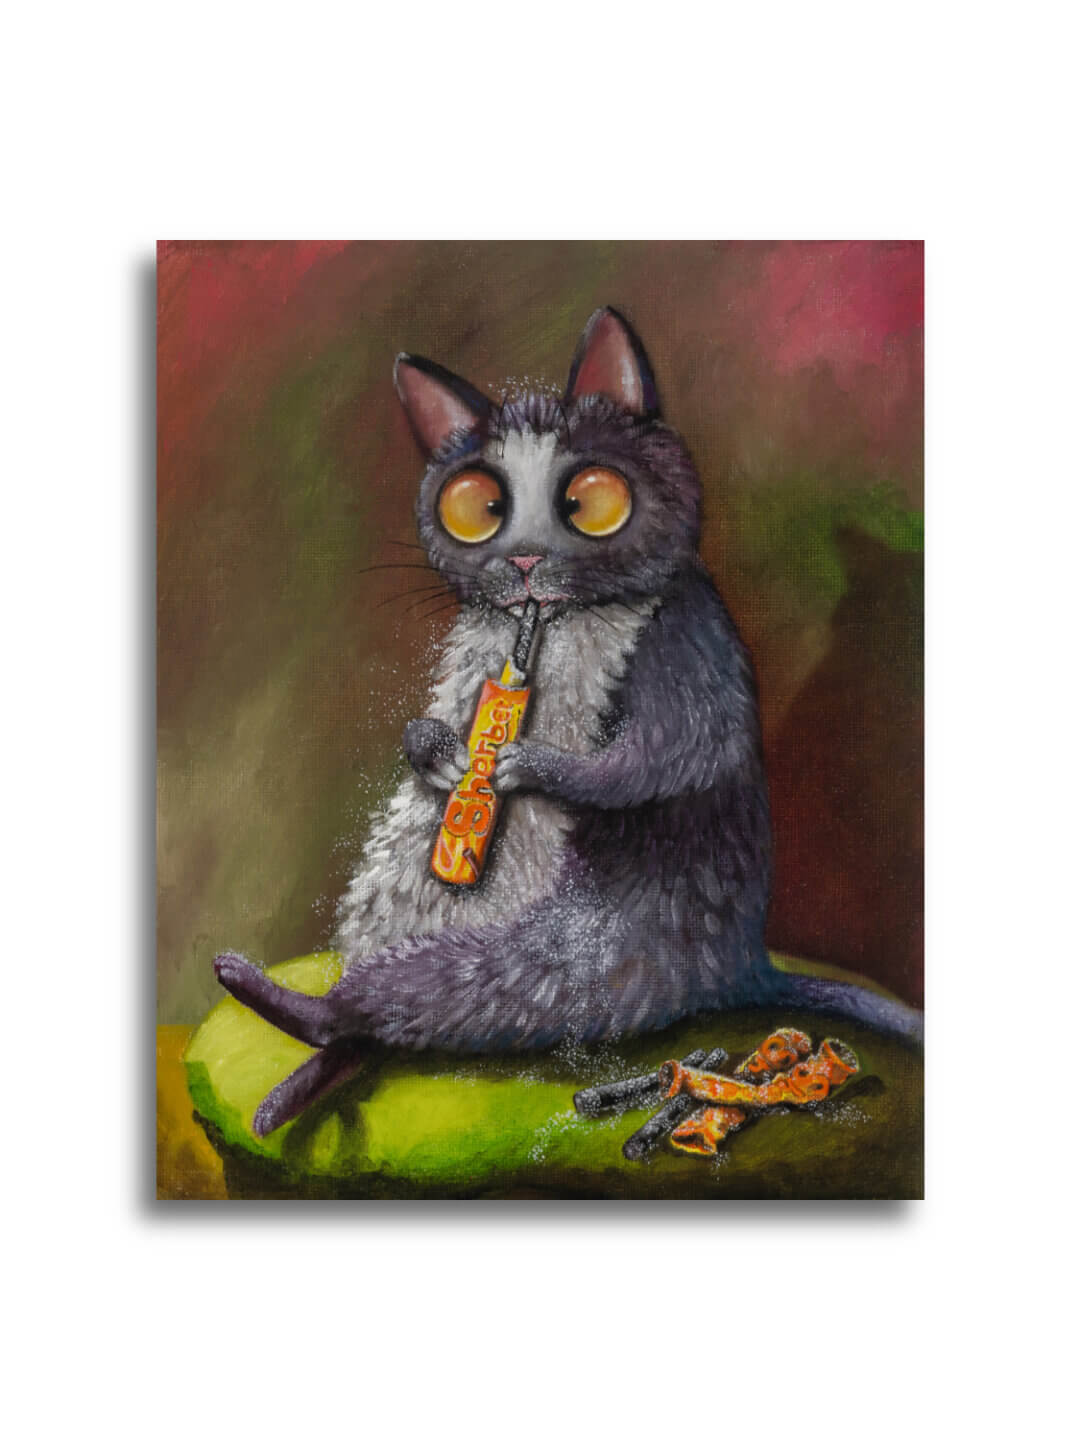 Sparky Hated the Licorice - Part of the 'Soup2Nuts' Collection by Ann Richmond - A painting of a crazed B&W cat who cares only for the sherbet... Framing Available.